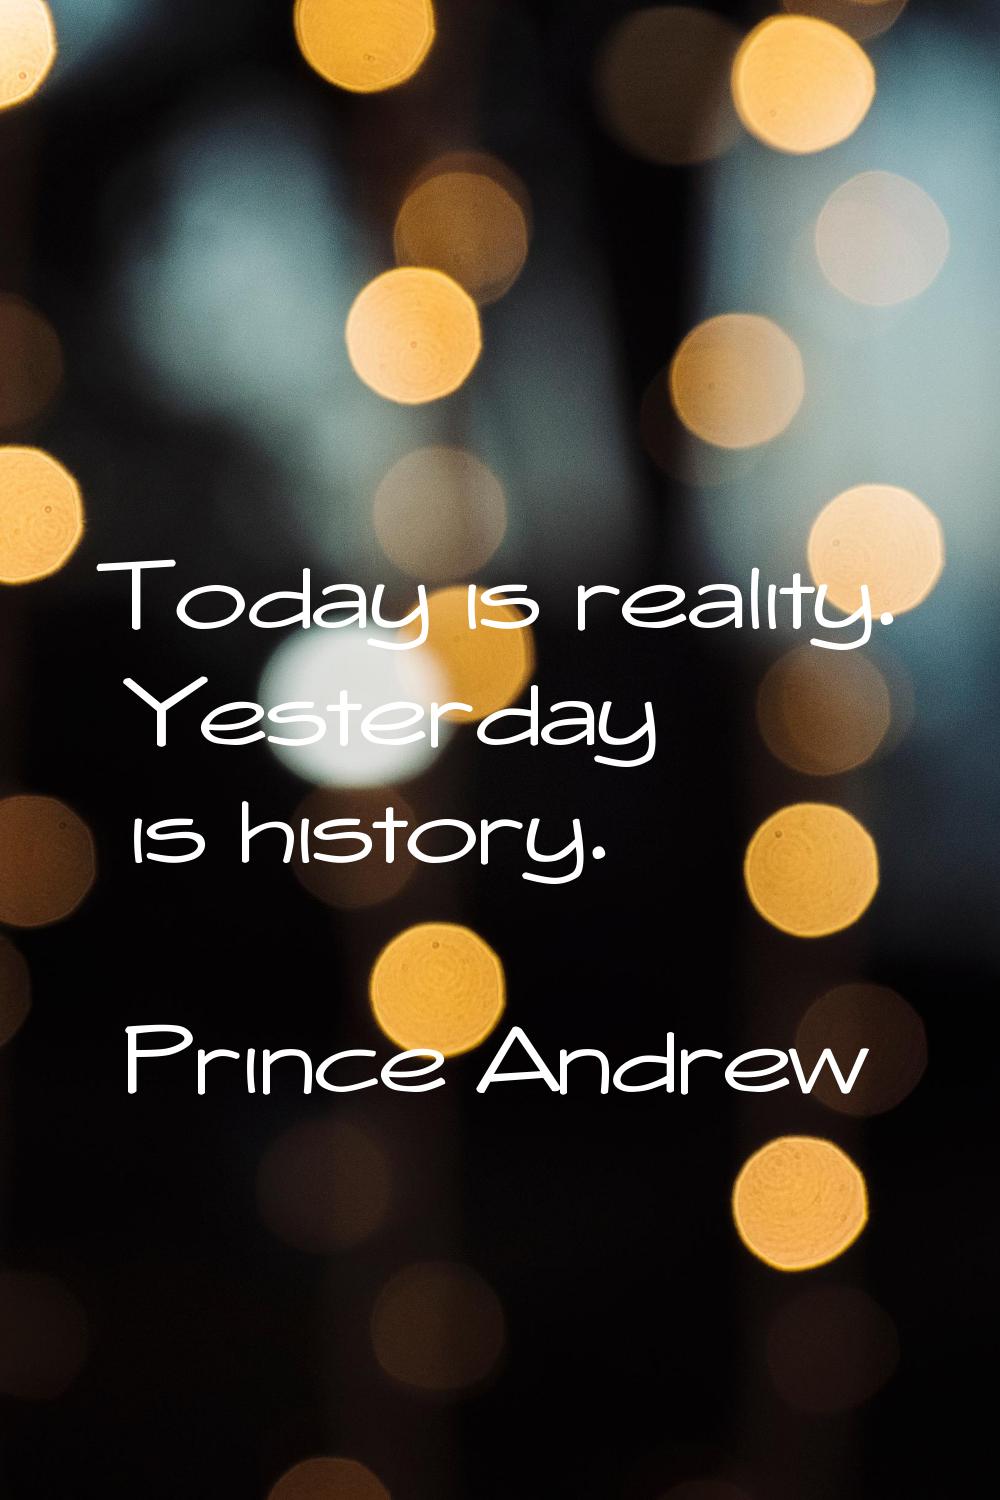 Today is reality. Yesterday is history.